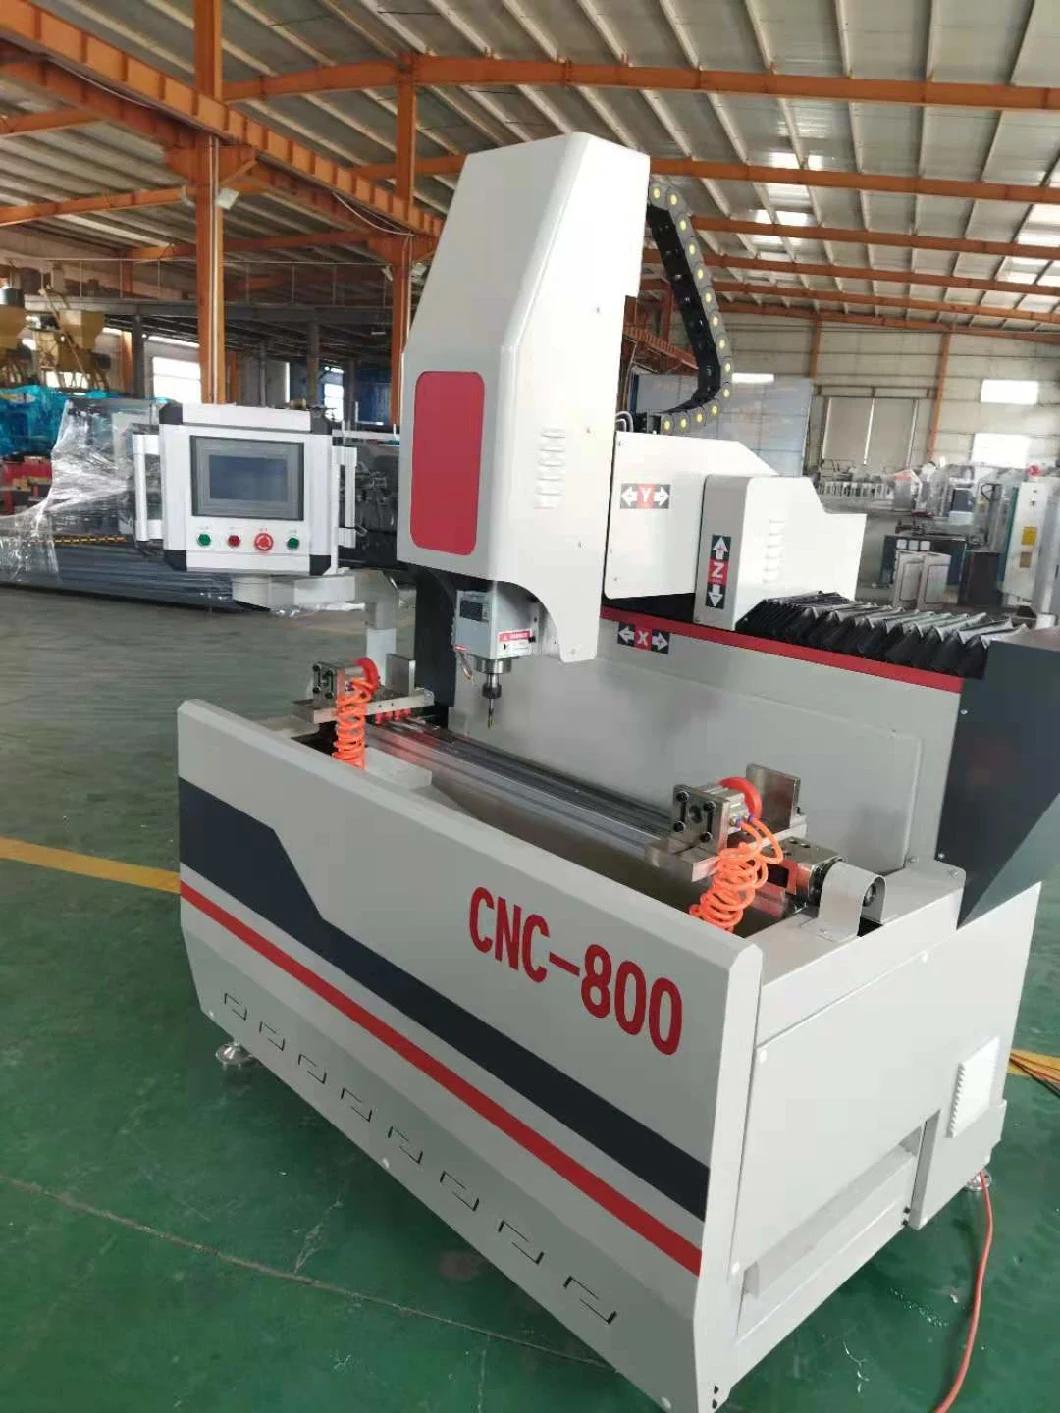 Lxf-CNC-800 CNC Drilling and Milling Machine for The Processing of Plane Engraving of Curtain Wall Aluminum Alloy Profiles for Doors and Windows Making